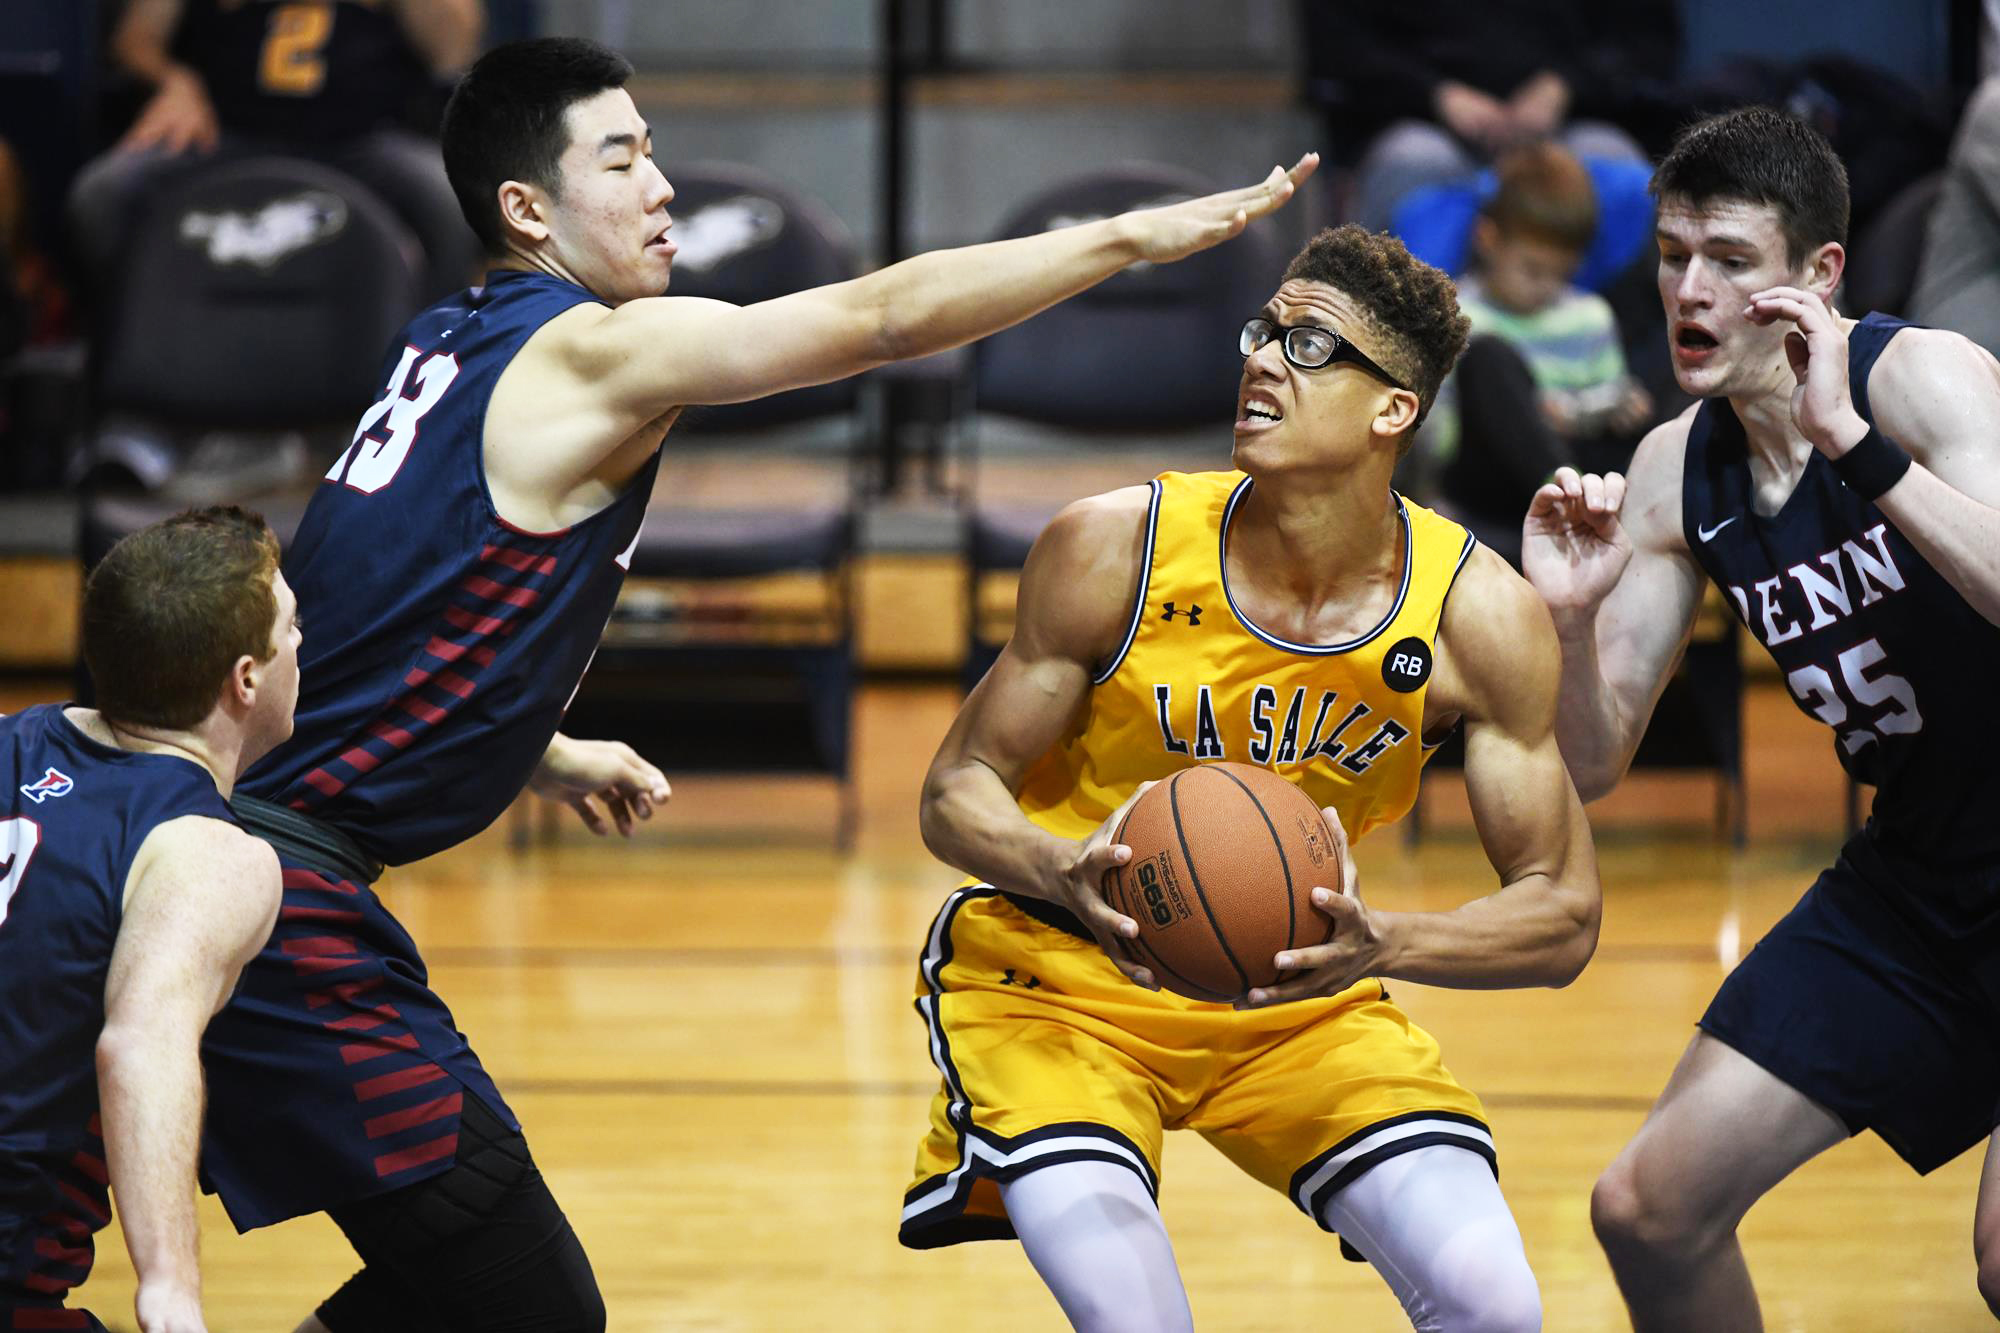 Penn players defend La Salle player with the ball at Tom Gola Arena.